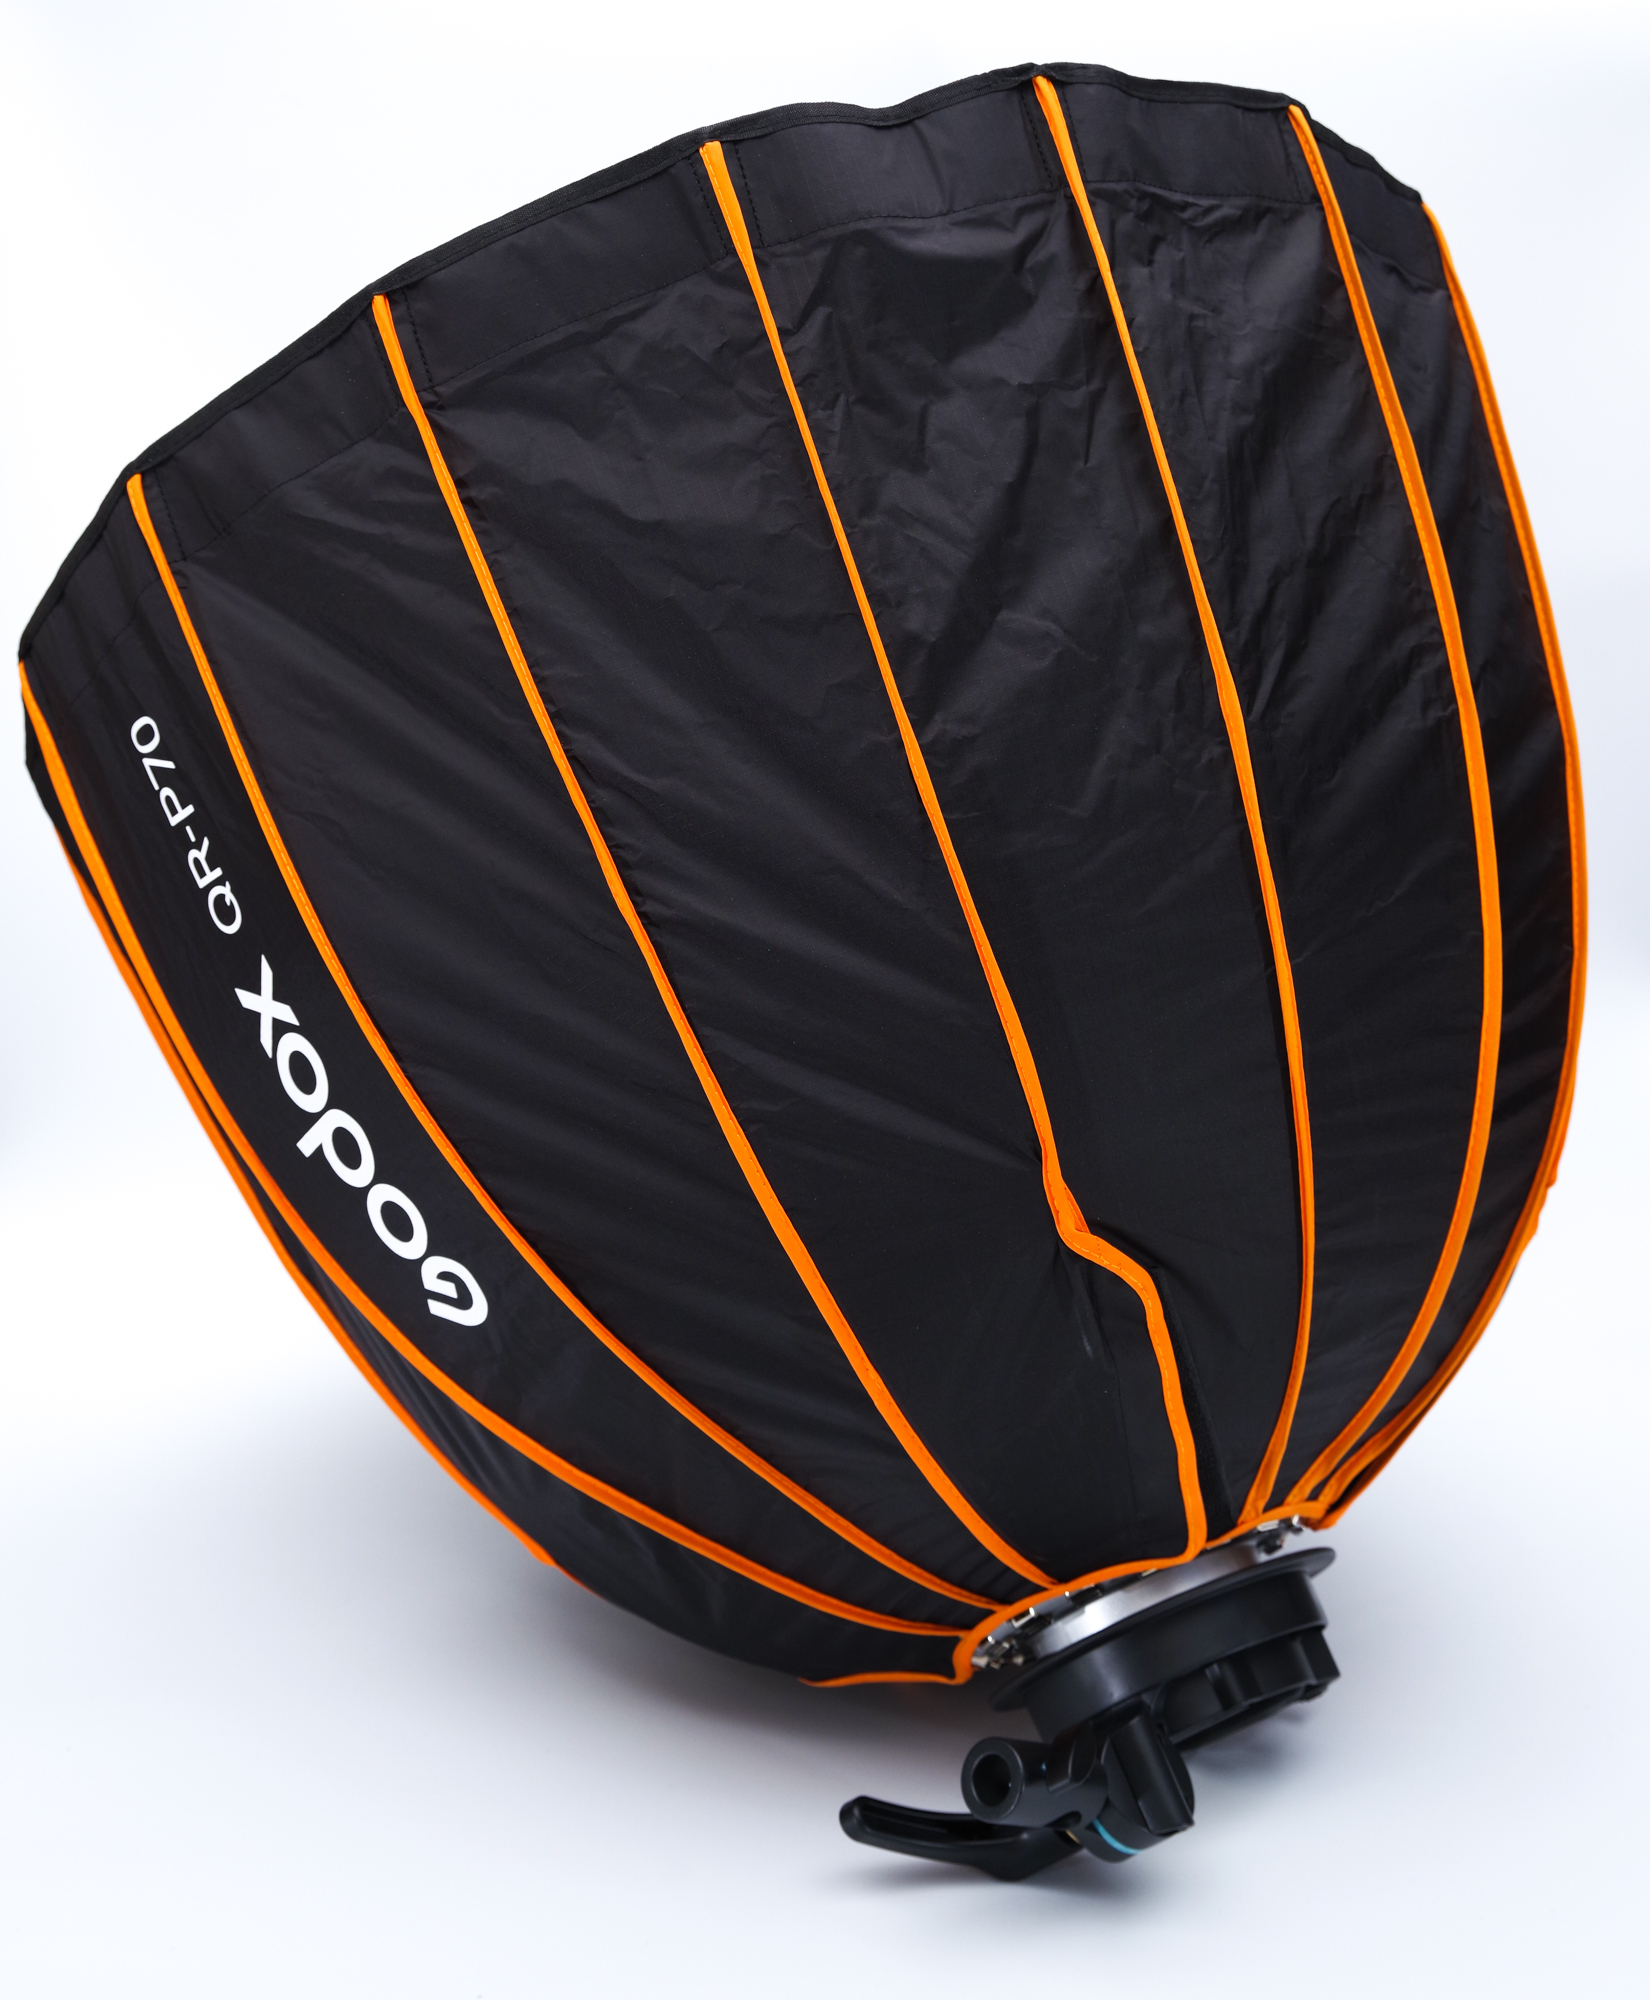 Godox QR-P70 Softbox Review - Light And Matter